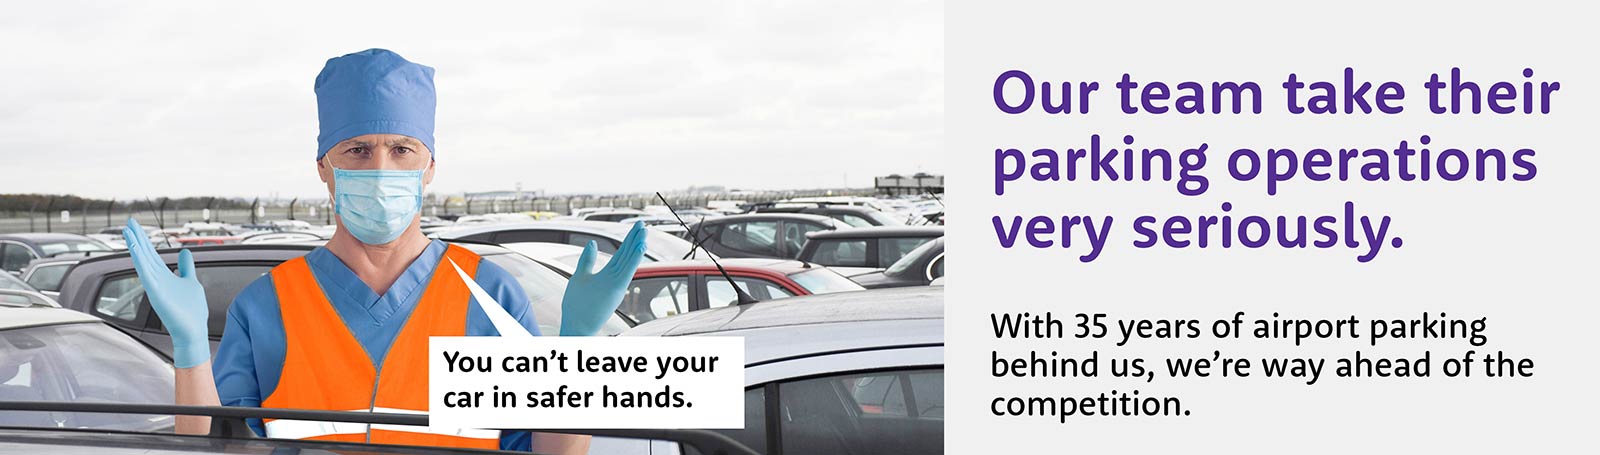 airport parking leave you car in safe hands with holiday extras 35 years of parking expertise